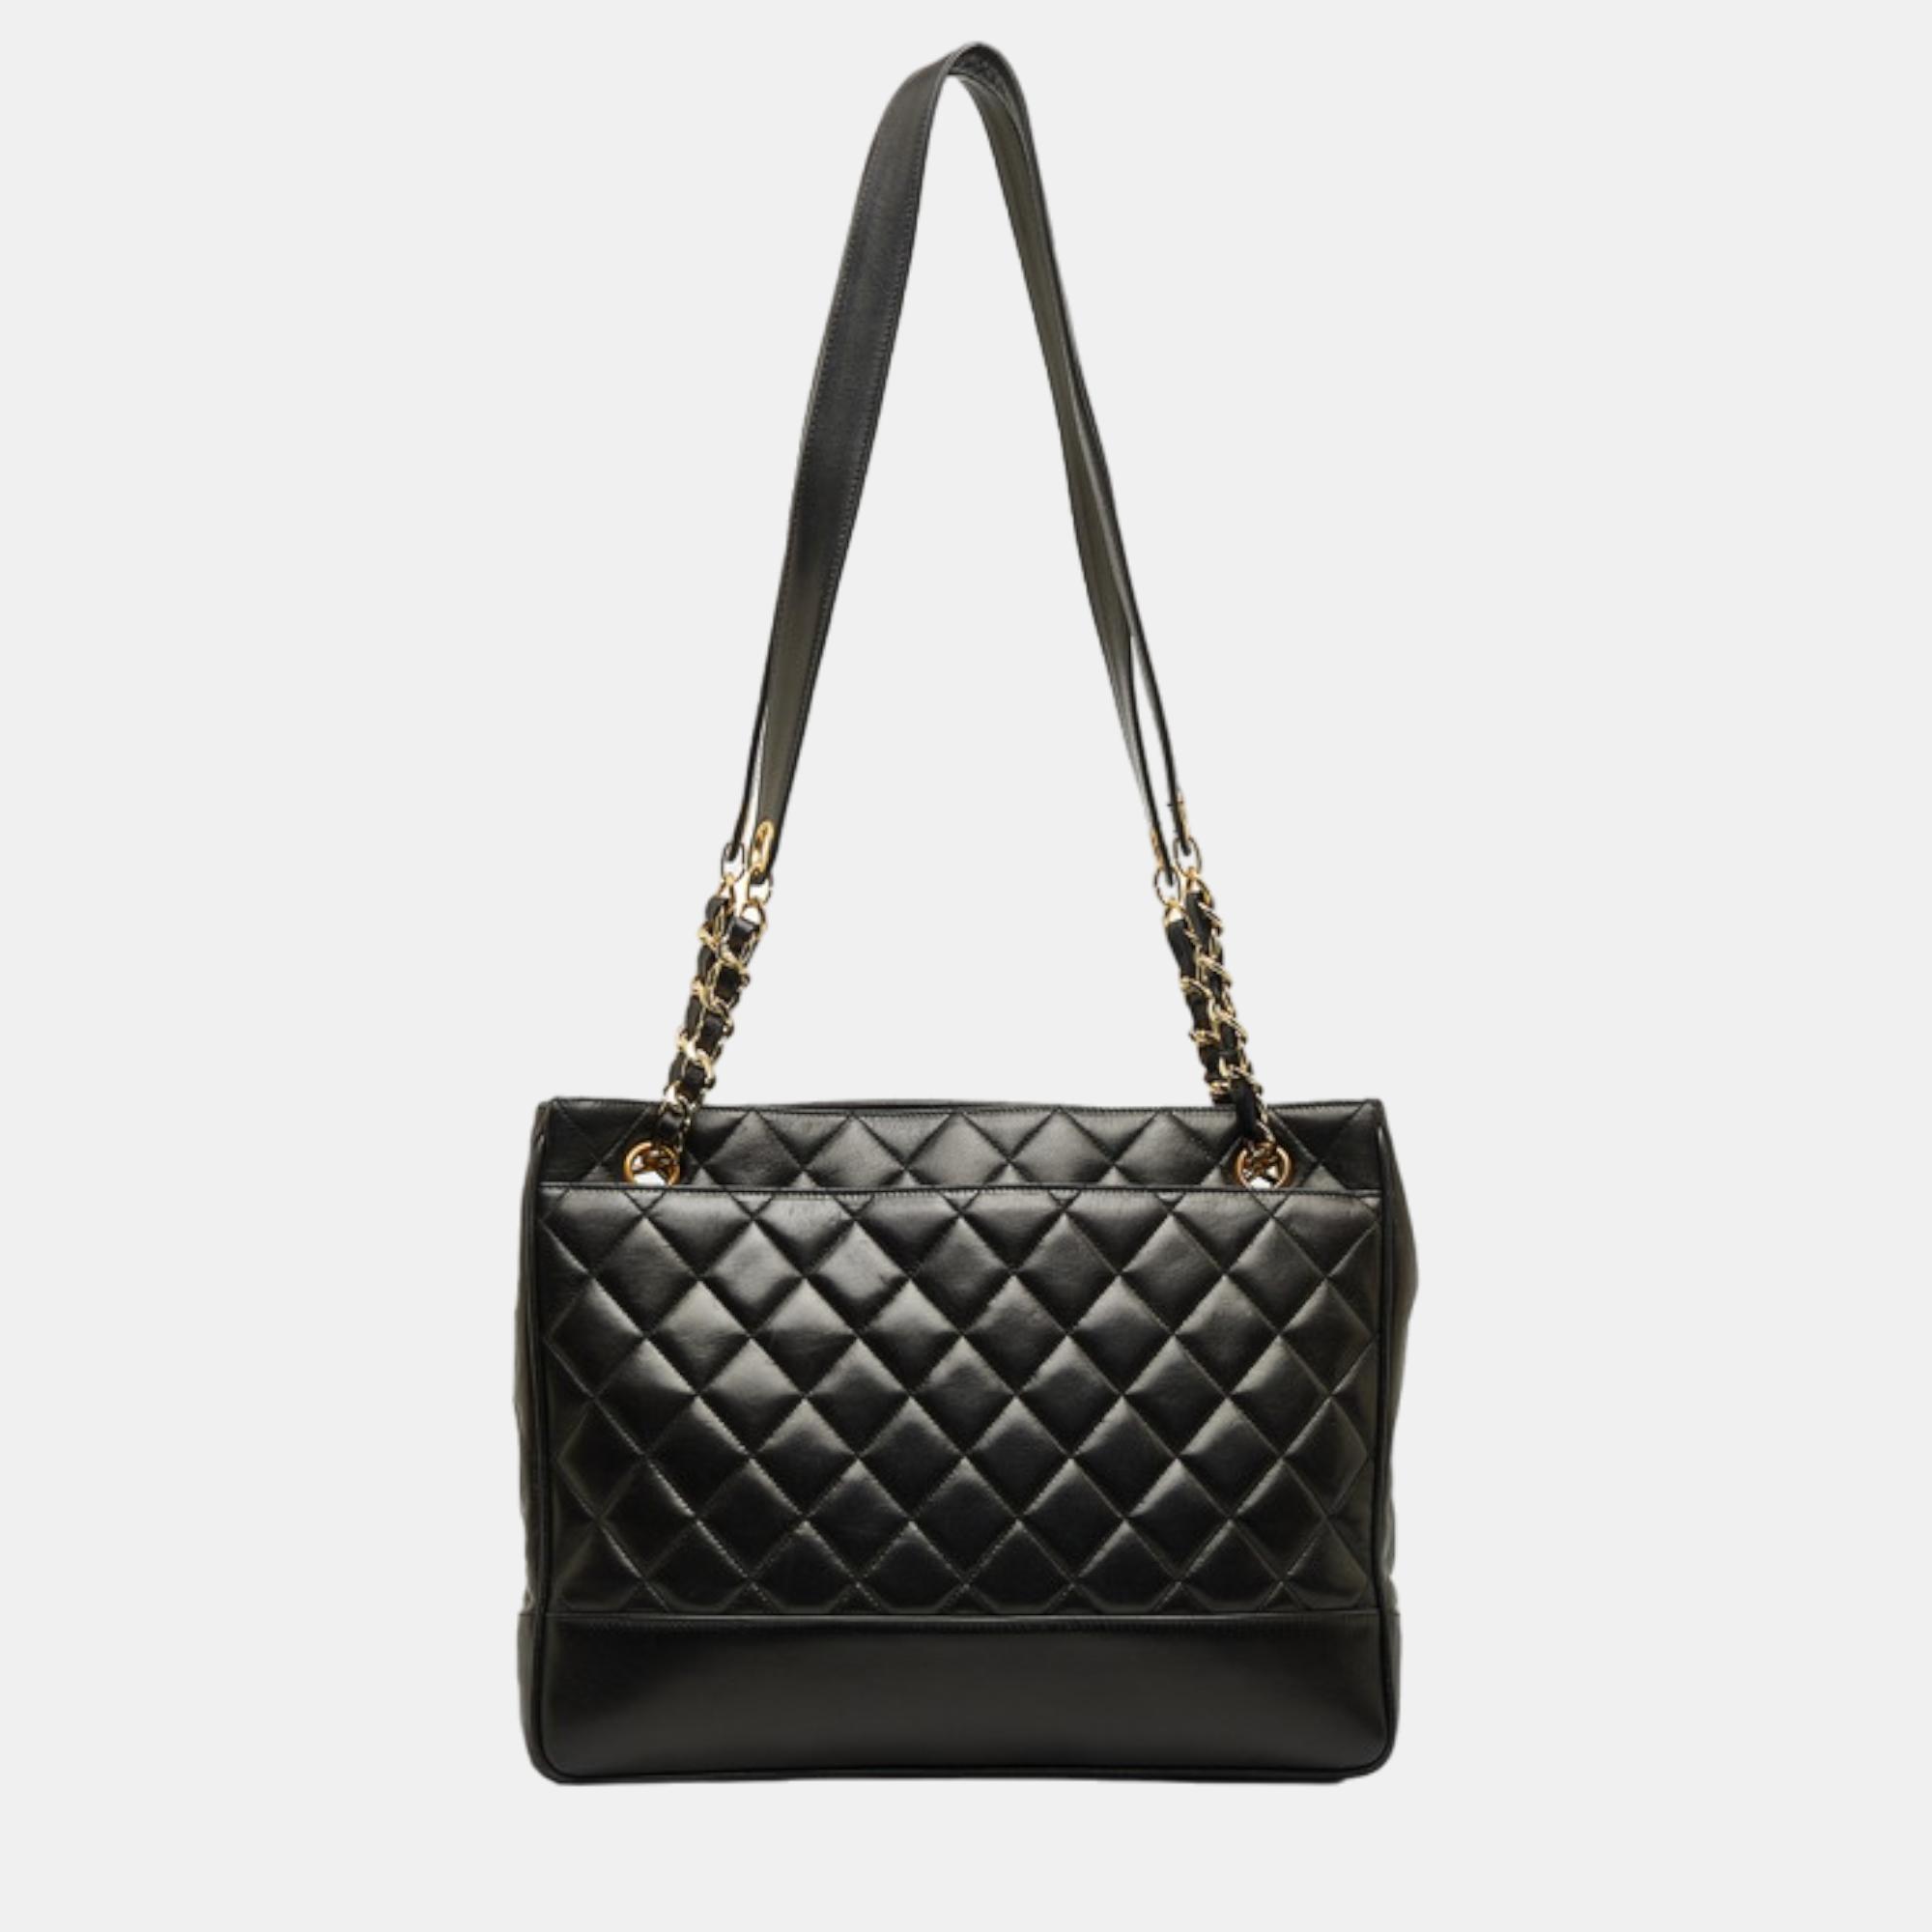 Chanel Black Leather Quilted CC Chain Shoulder Bag